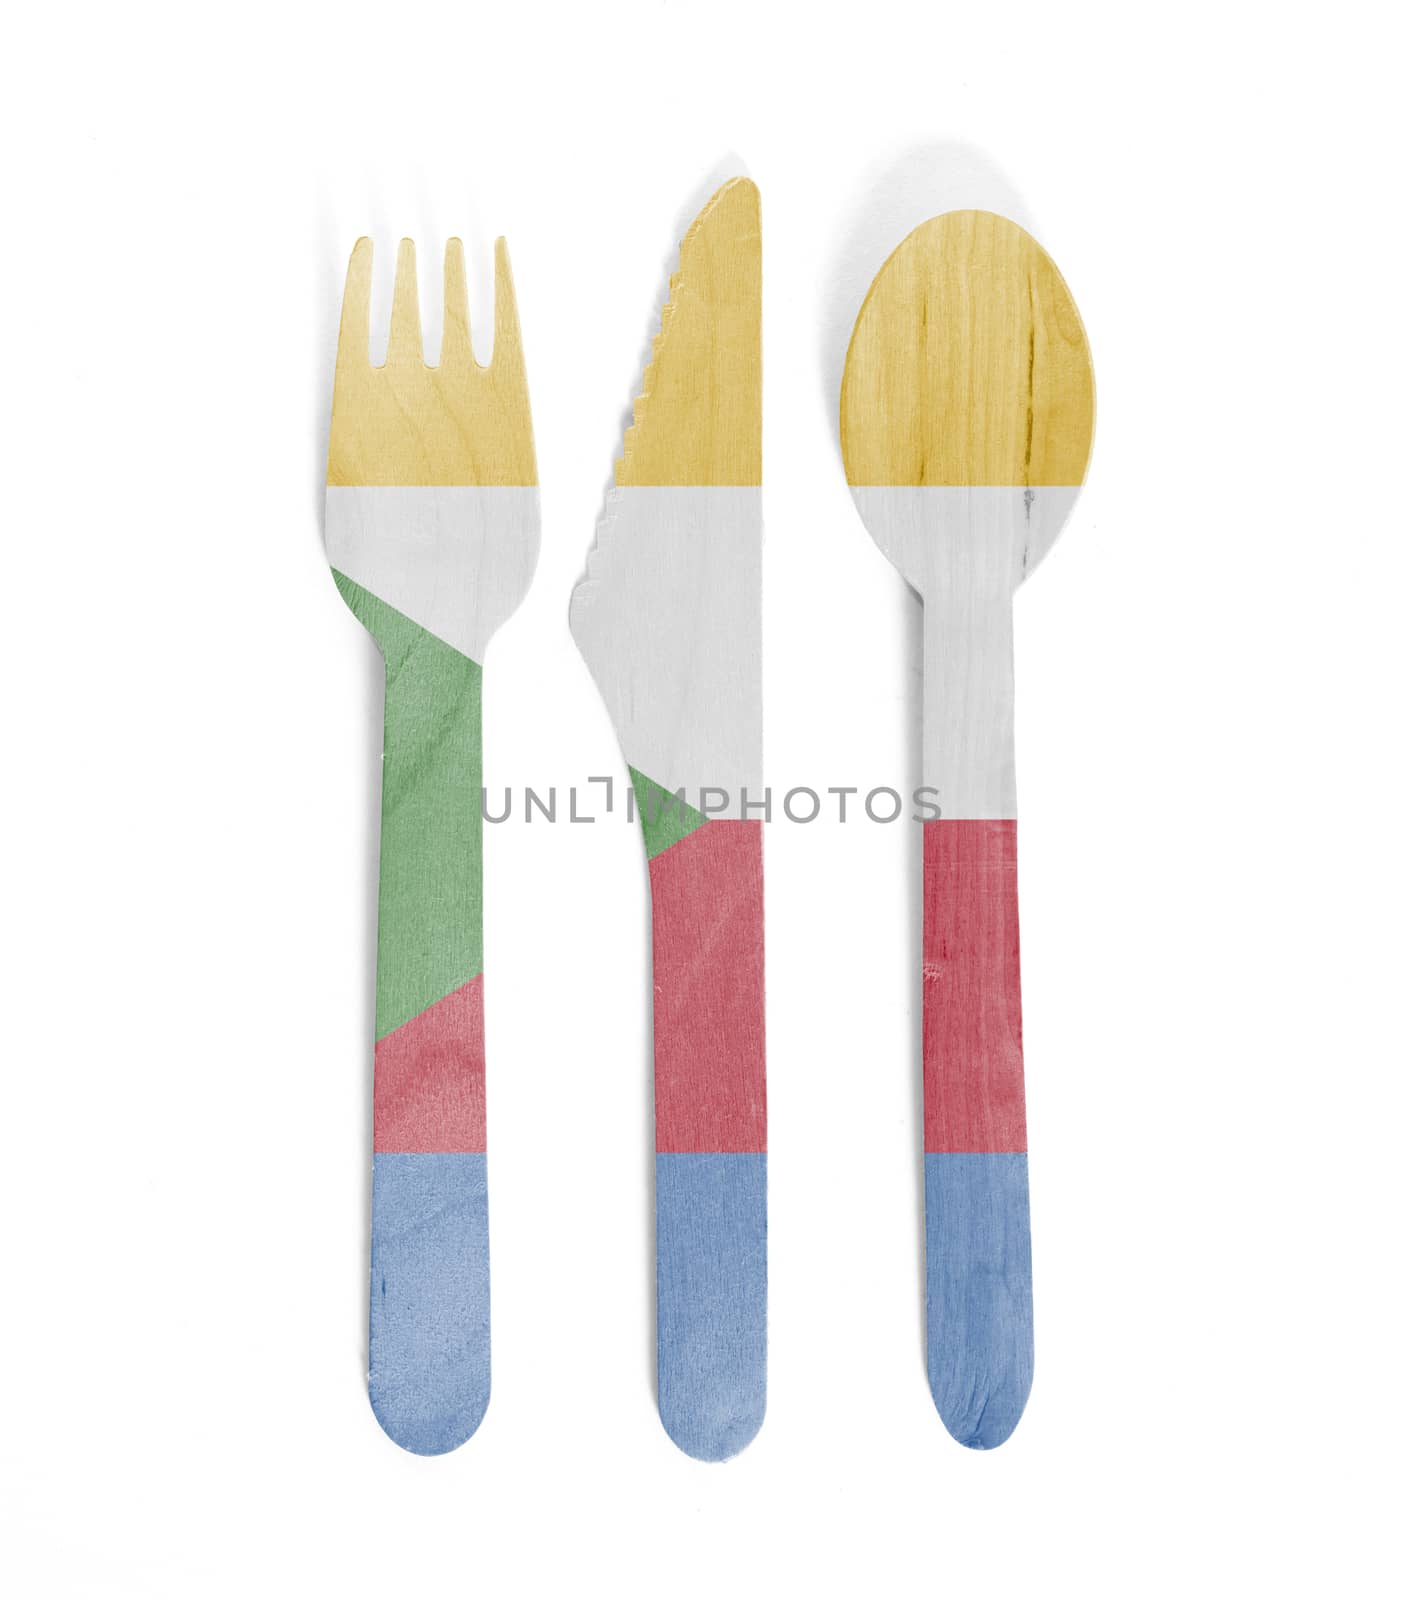 Eco friendly wooden cutlery - Plastic free concept - Isolated - Flag of Comoros